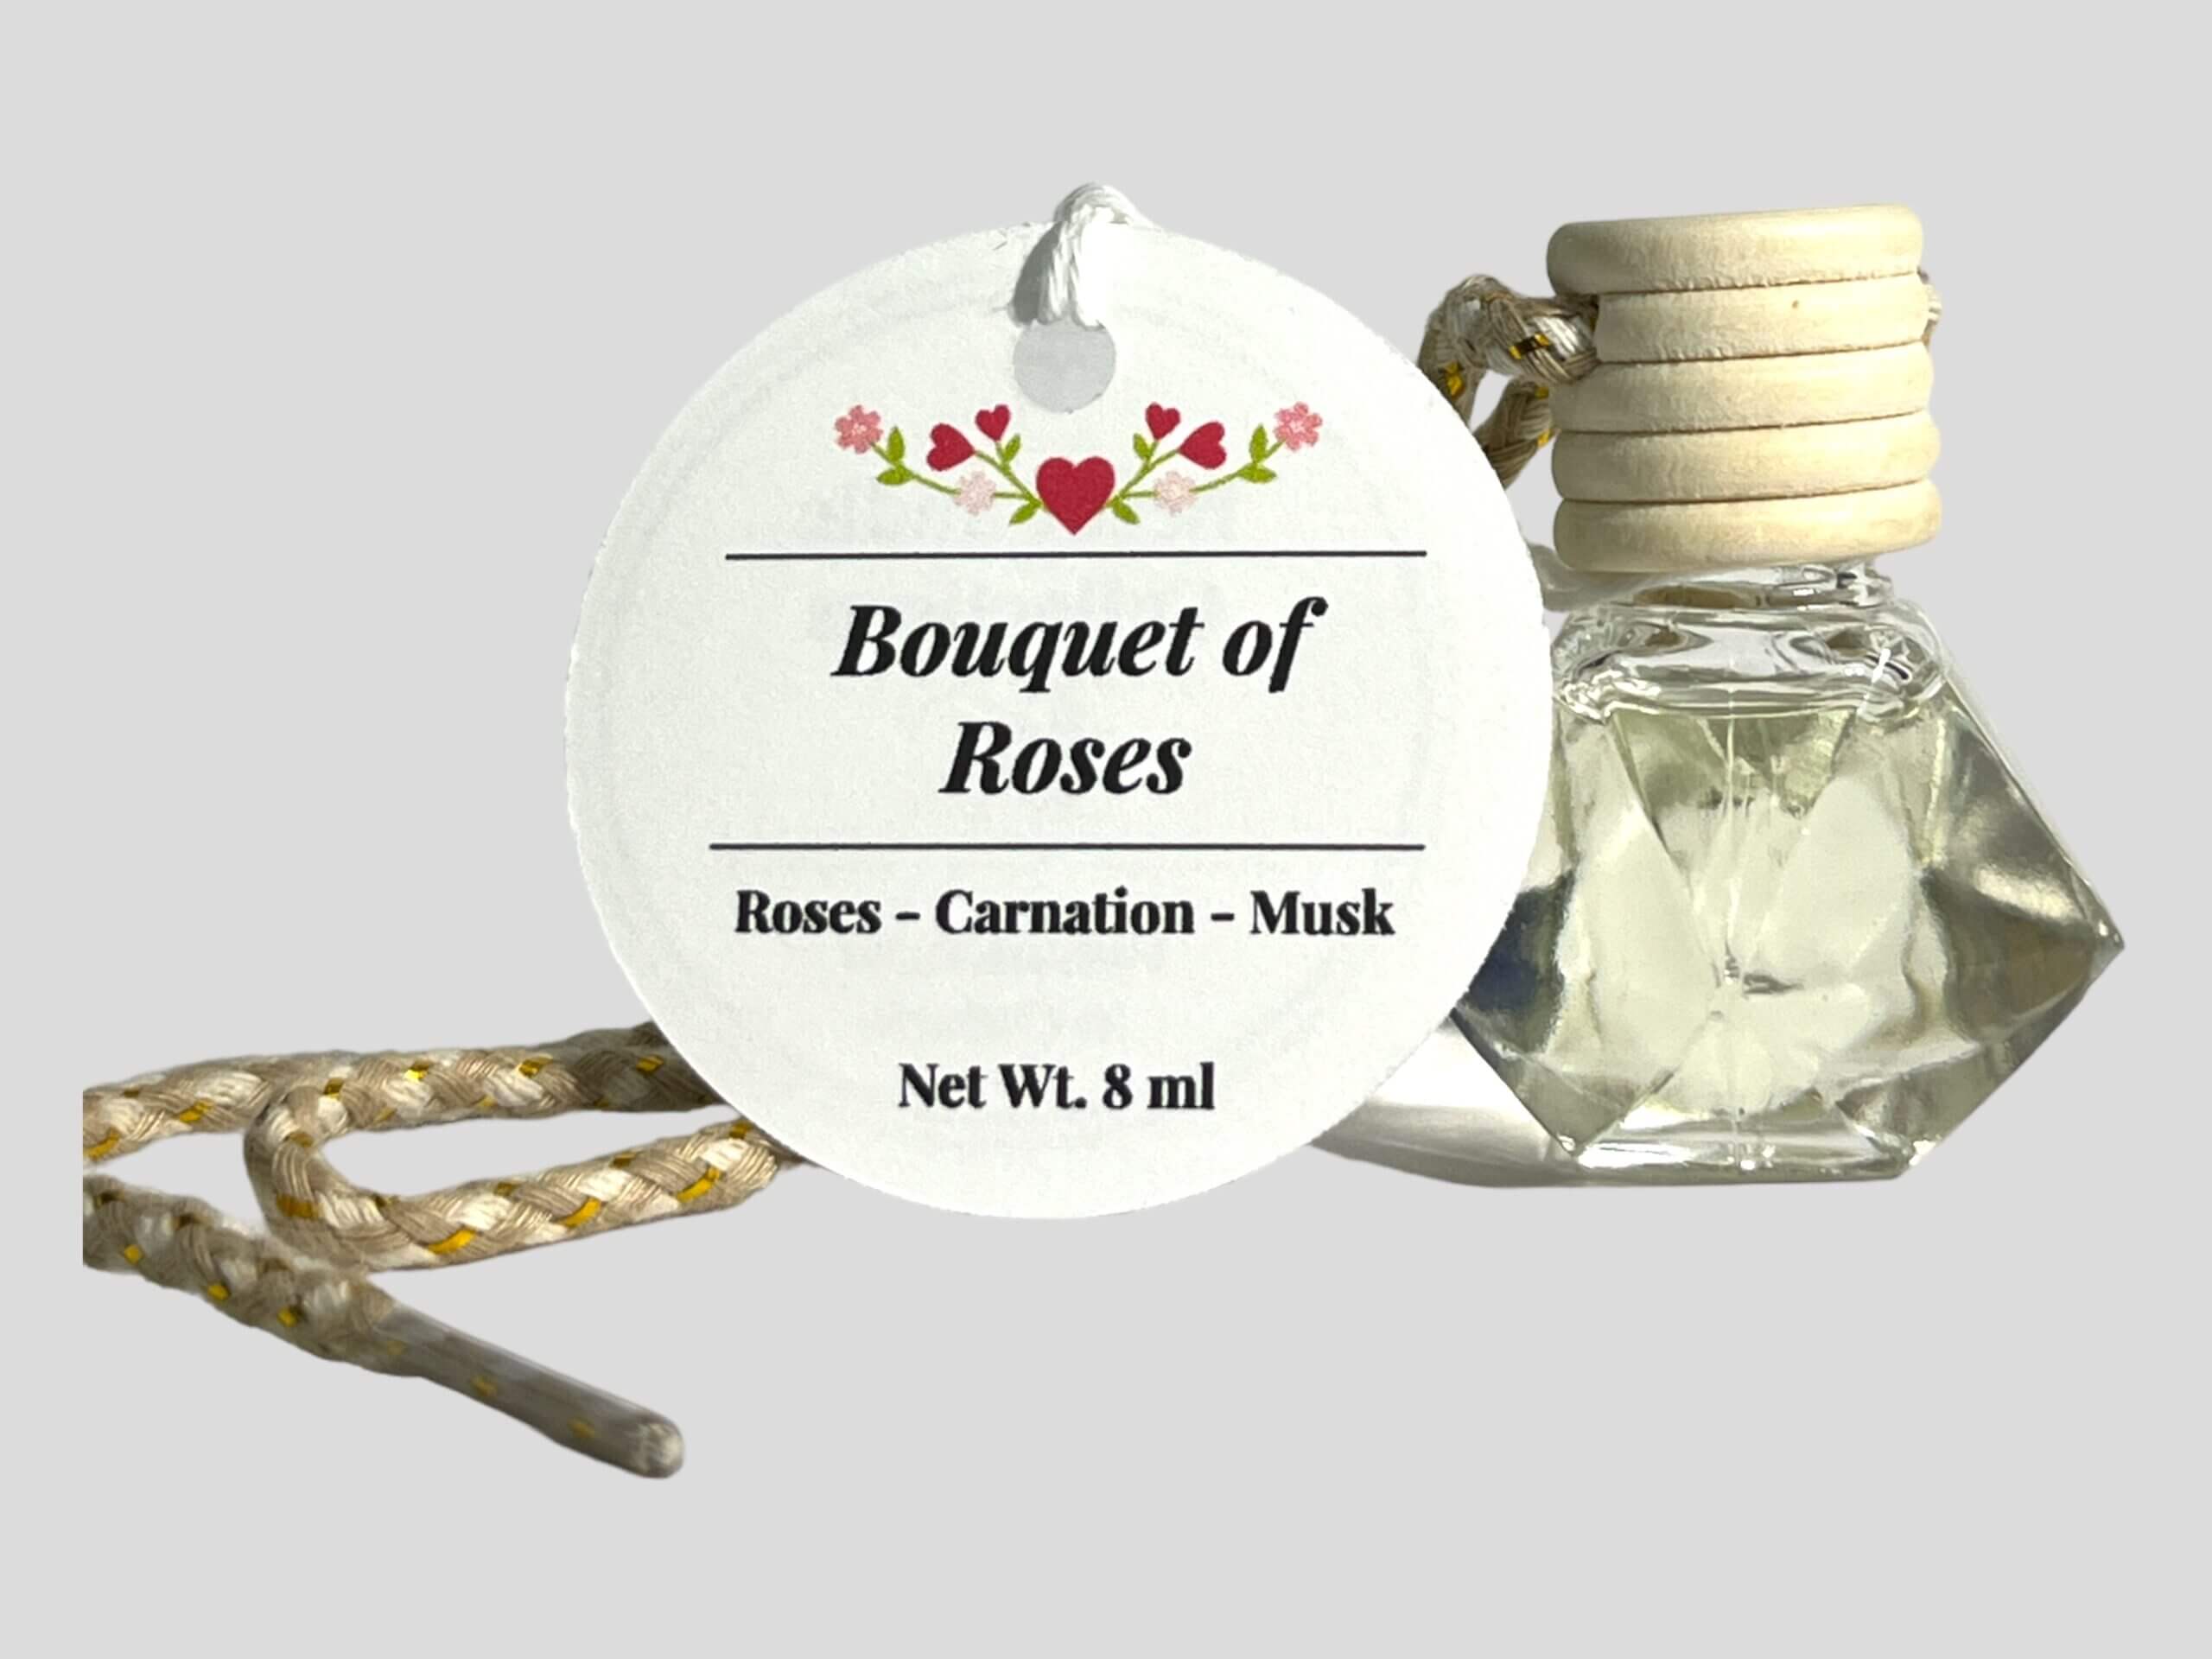 Car Diffuser bottles with Roses fragrance